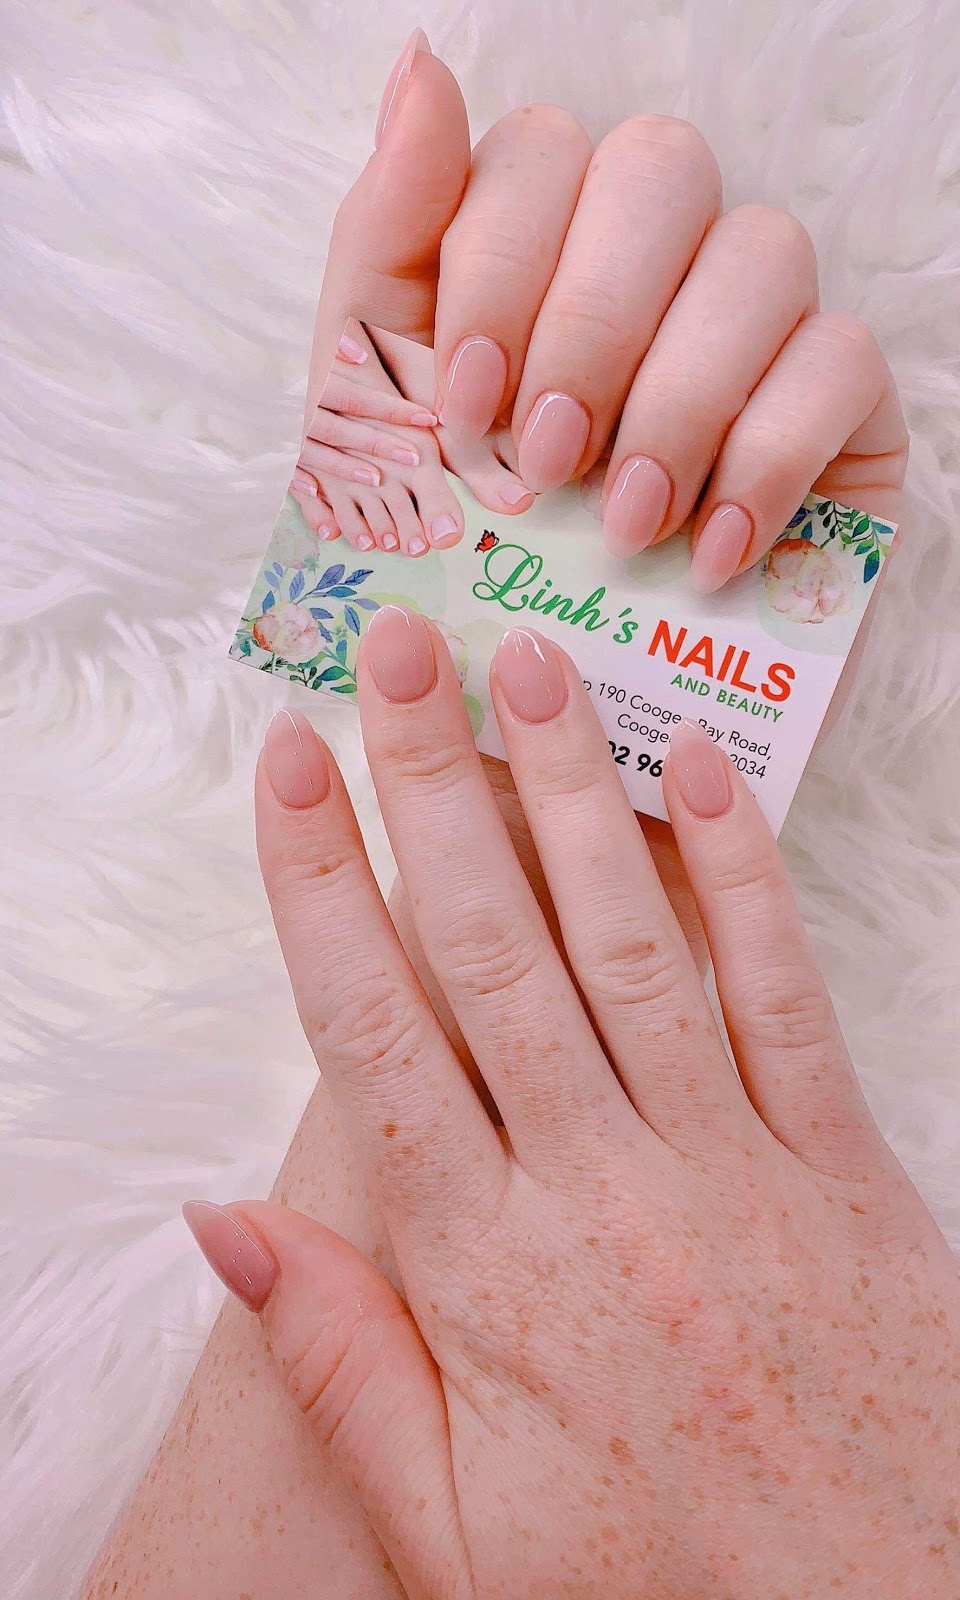 Linh’s nails and beauty | 190 Coogee Bay Rd, Coogee NSW 2034, Australia | Phone: (02) 9664 3228